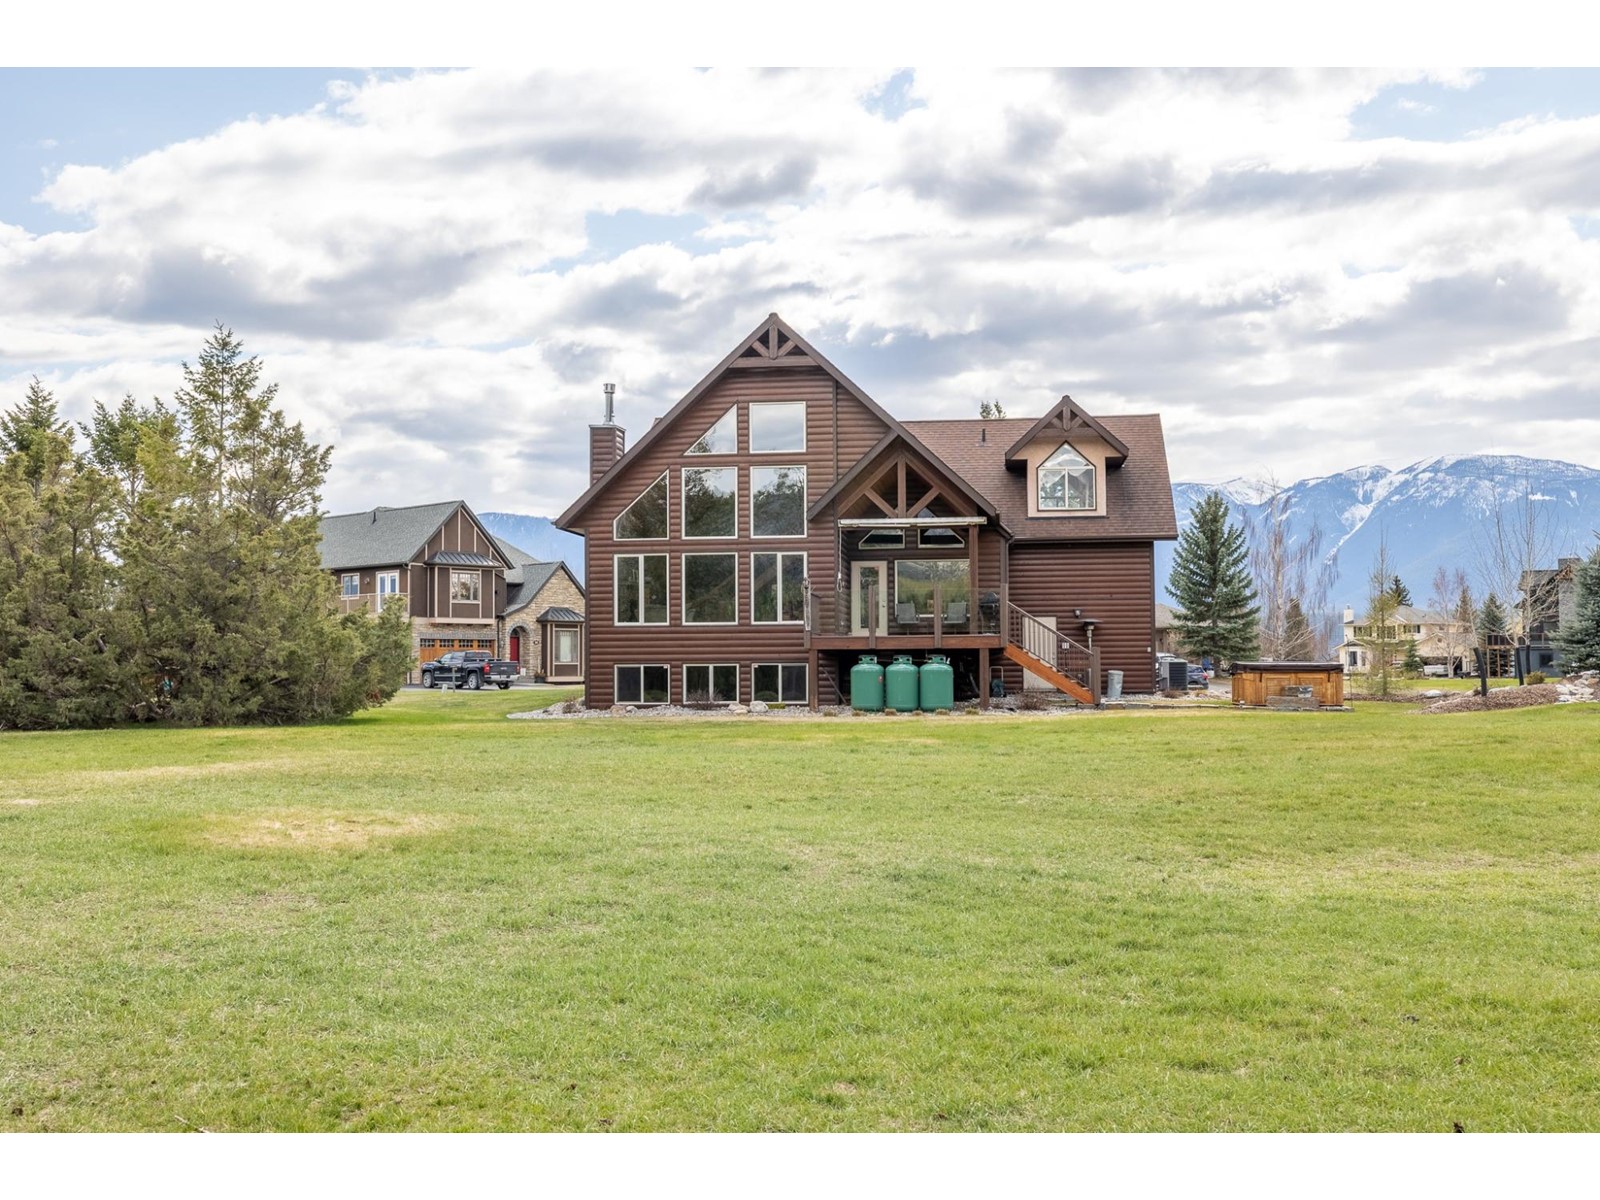 33 - 640 Upper Lakeview Road, Invermere, British Columbia  V0A 1K3 - Photo 4 - 2476399